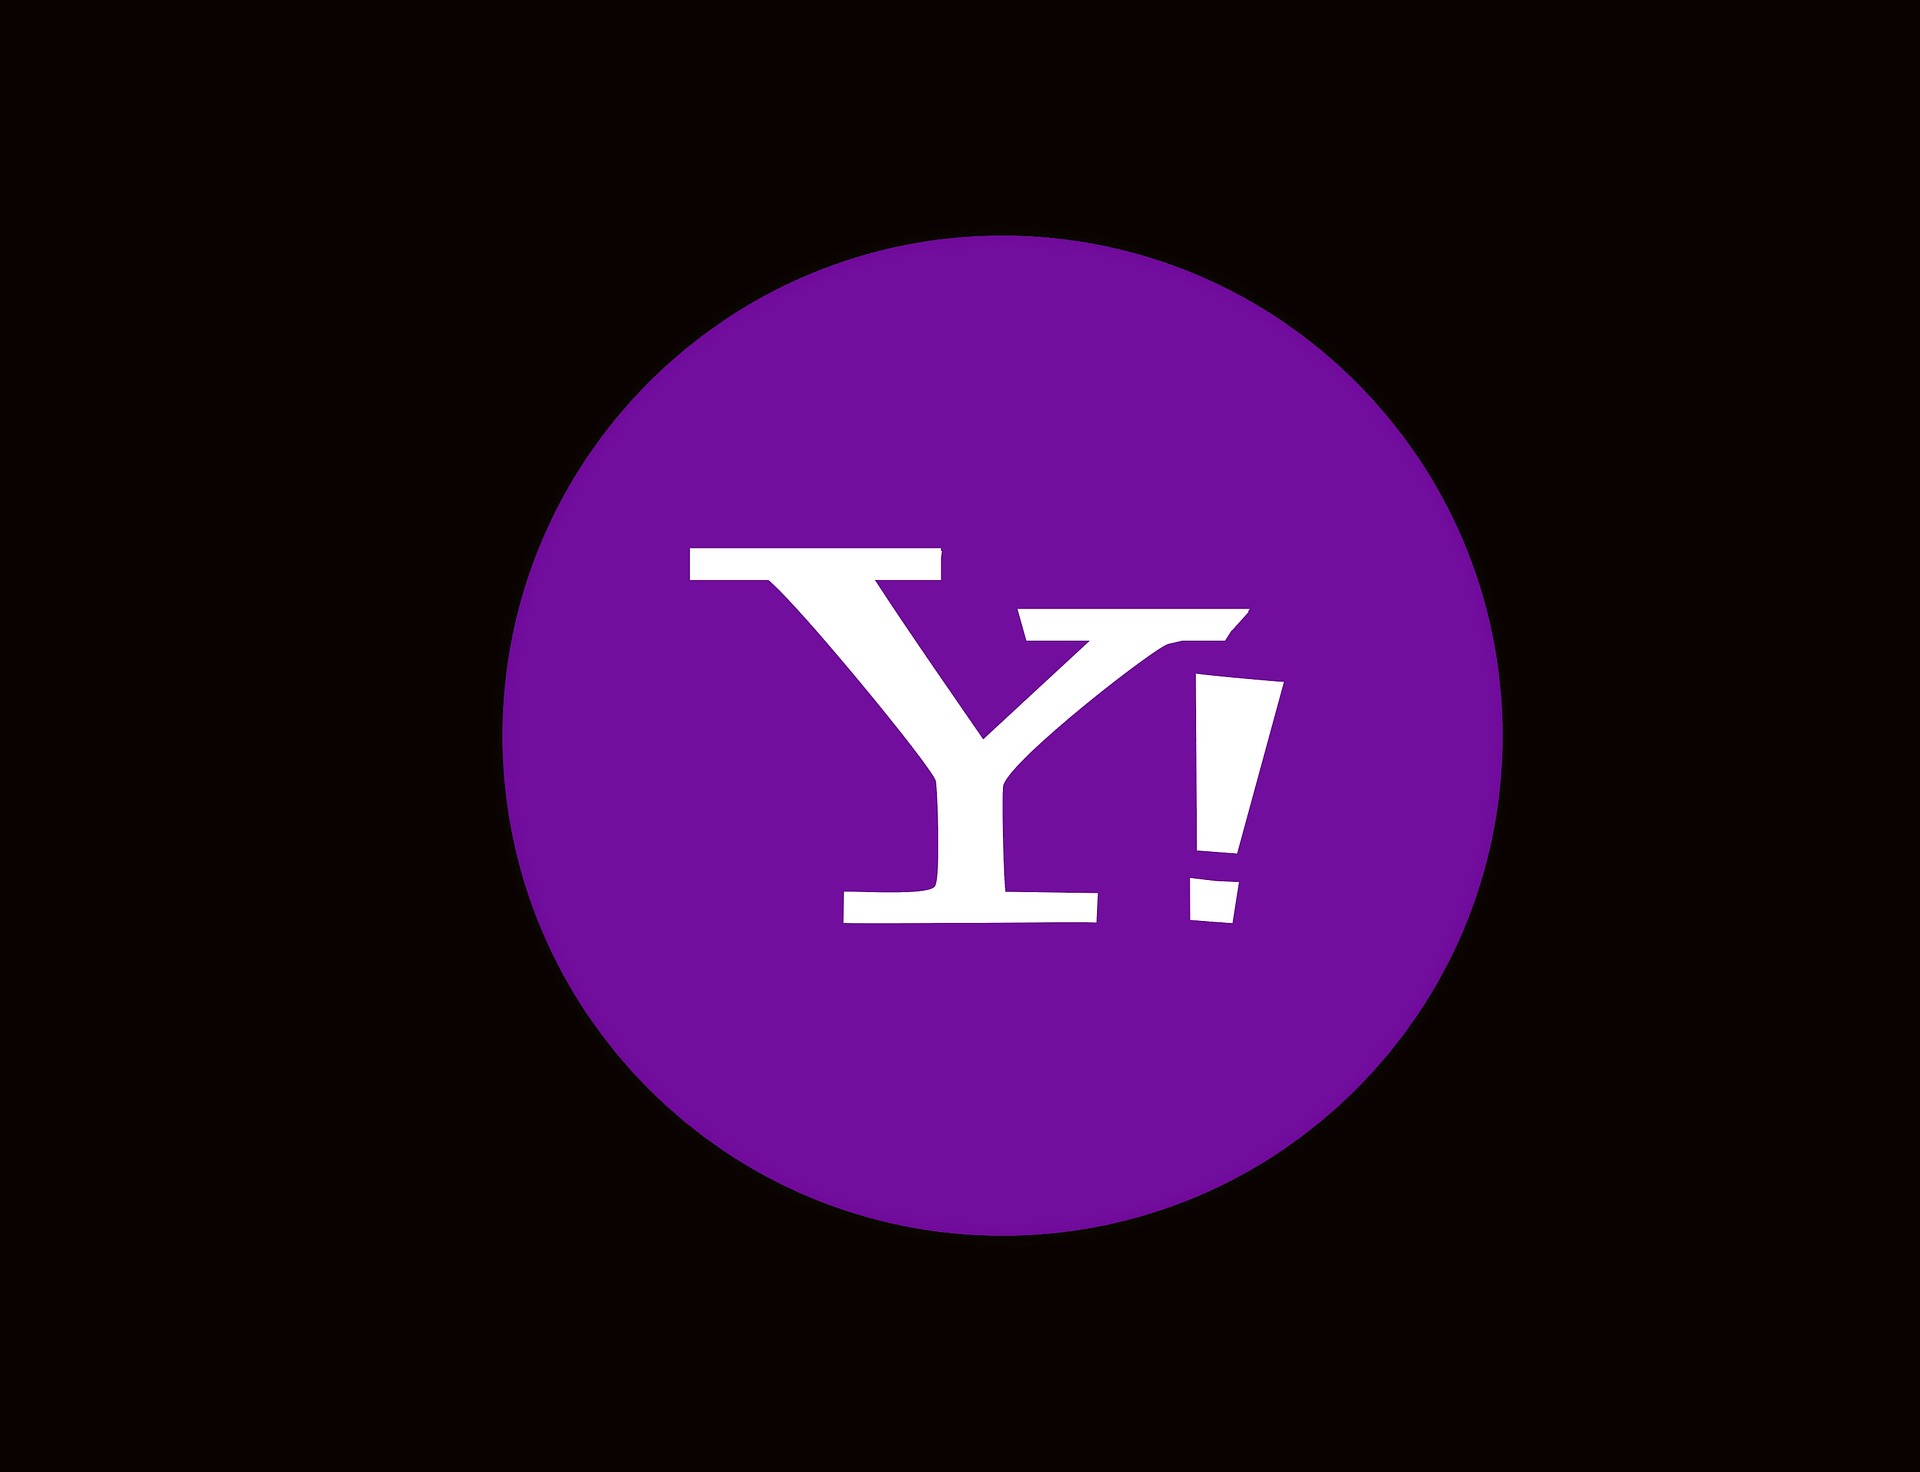 Yahoo Groups is changing